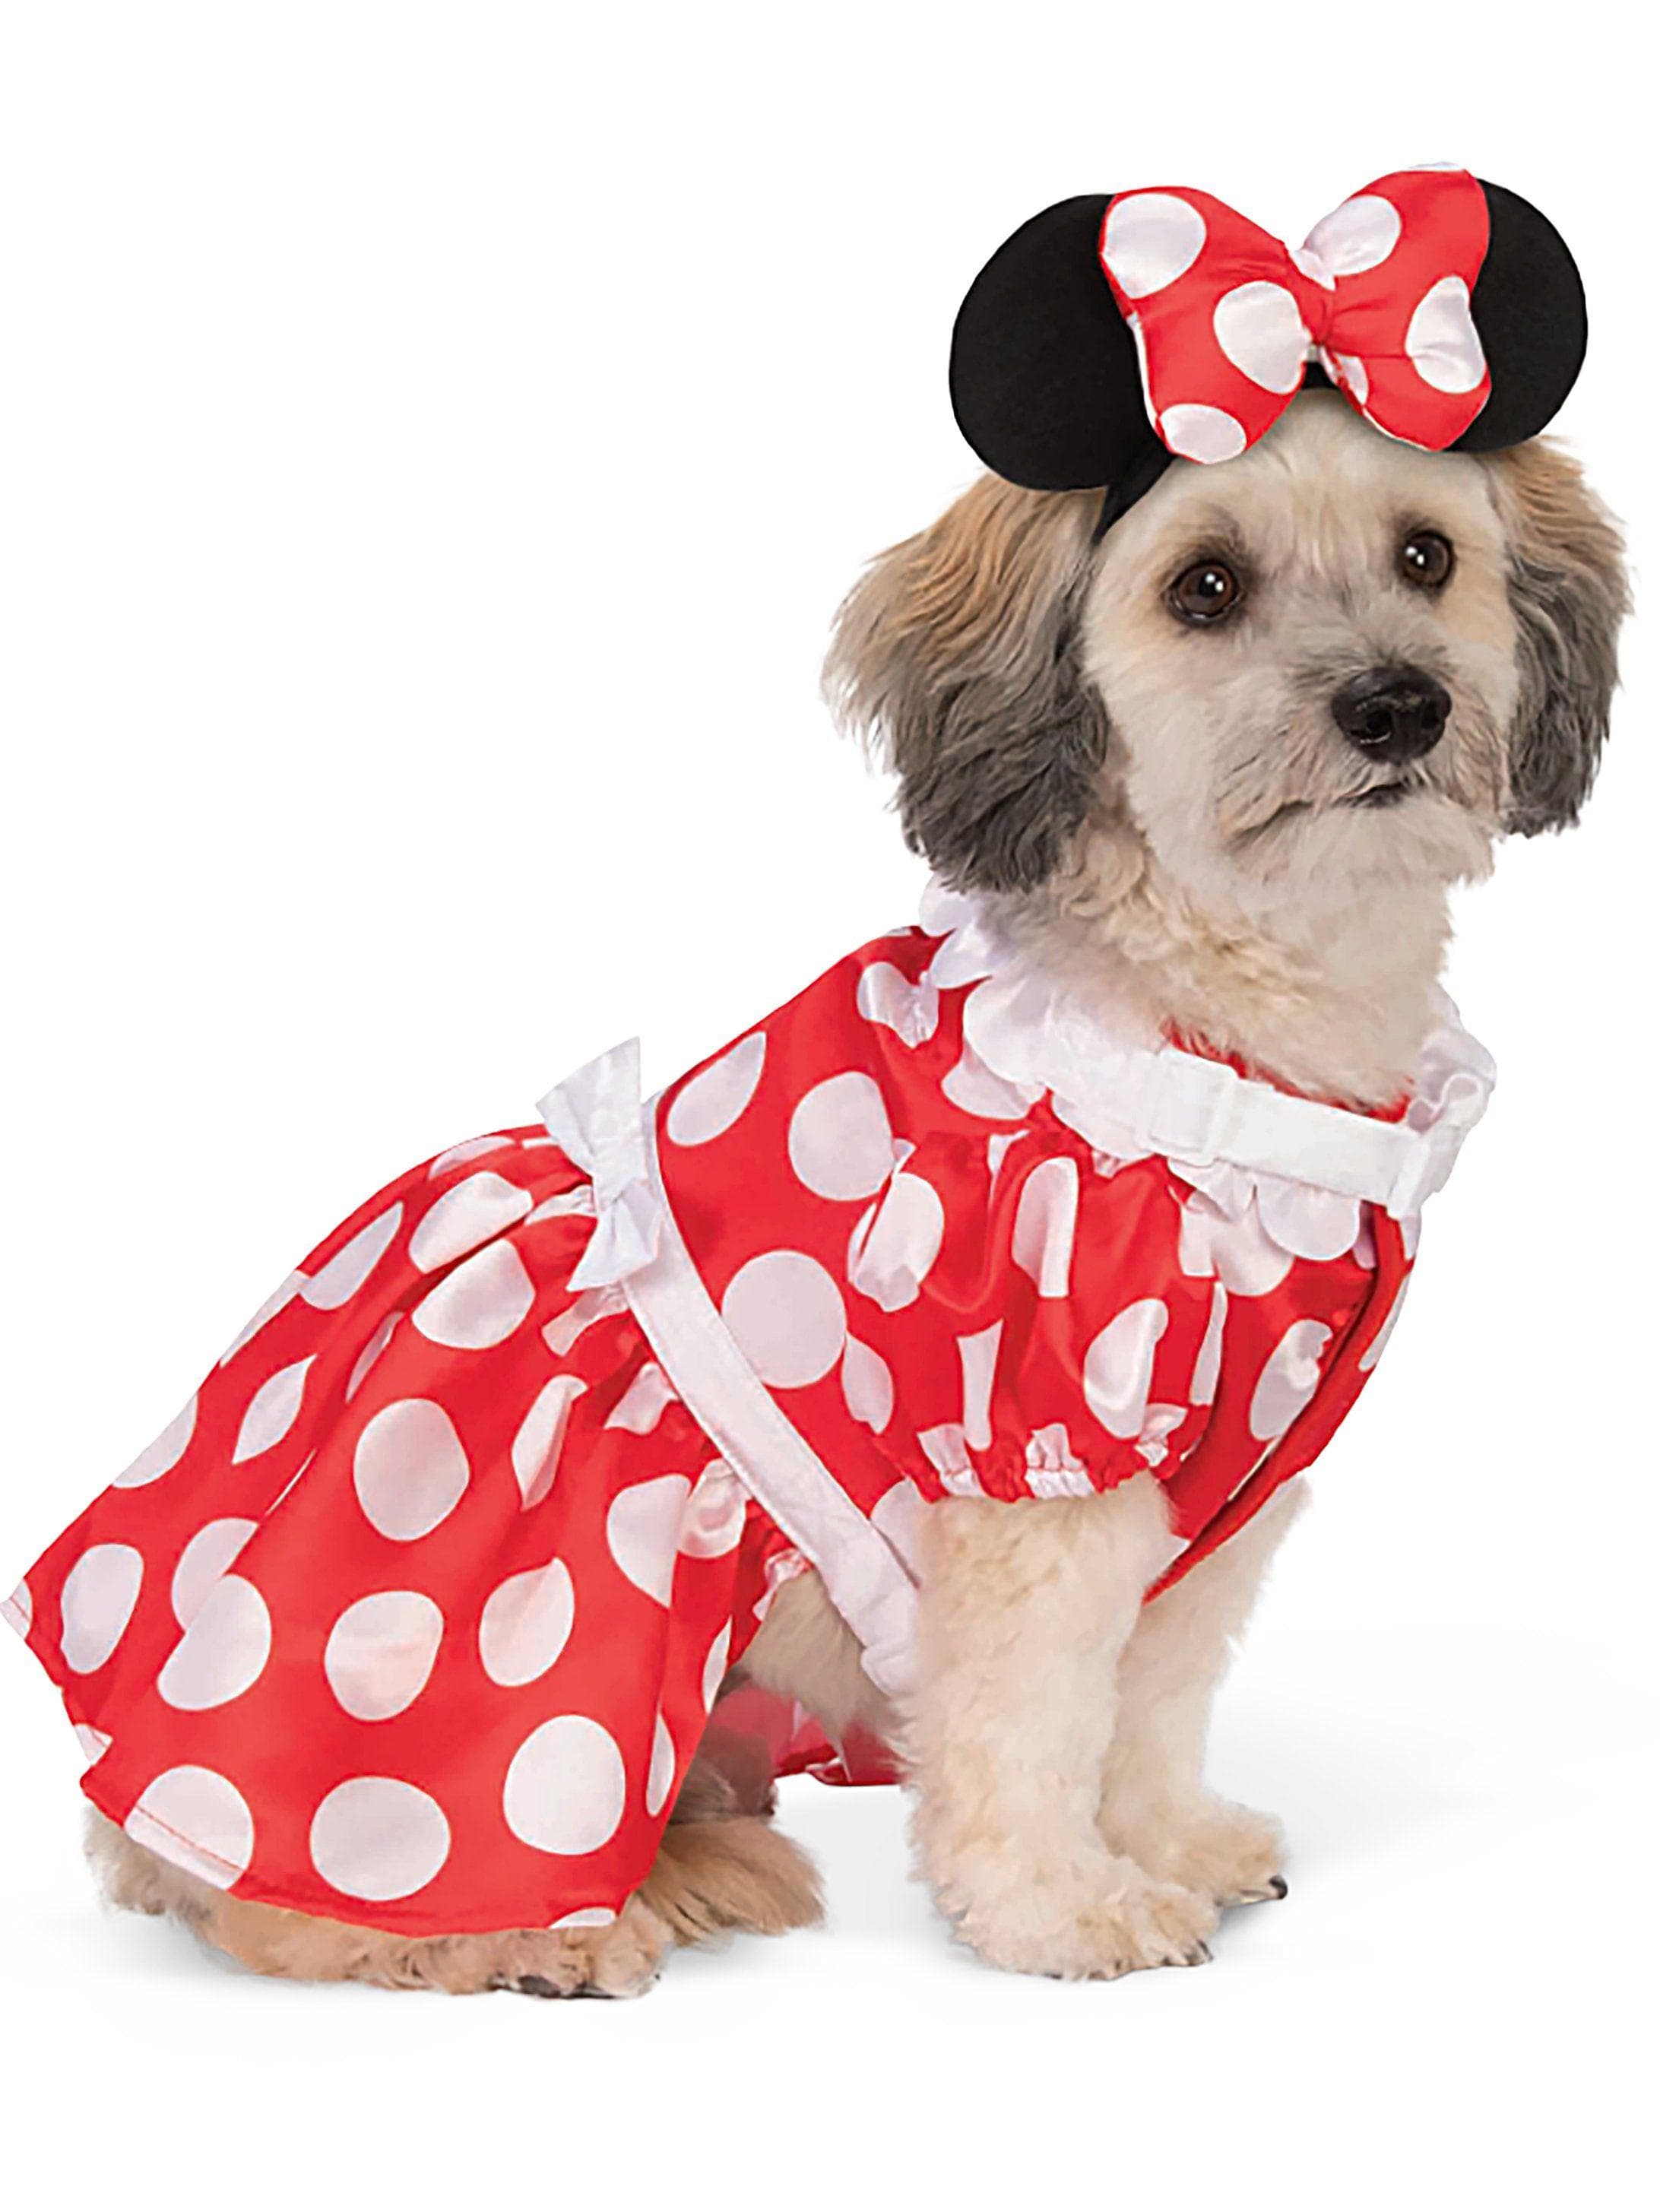 Minnie Mouse Pet Headpiece and Harness - costumes.com